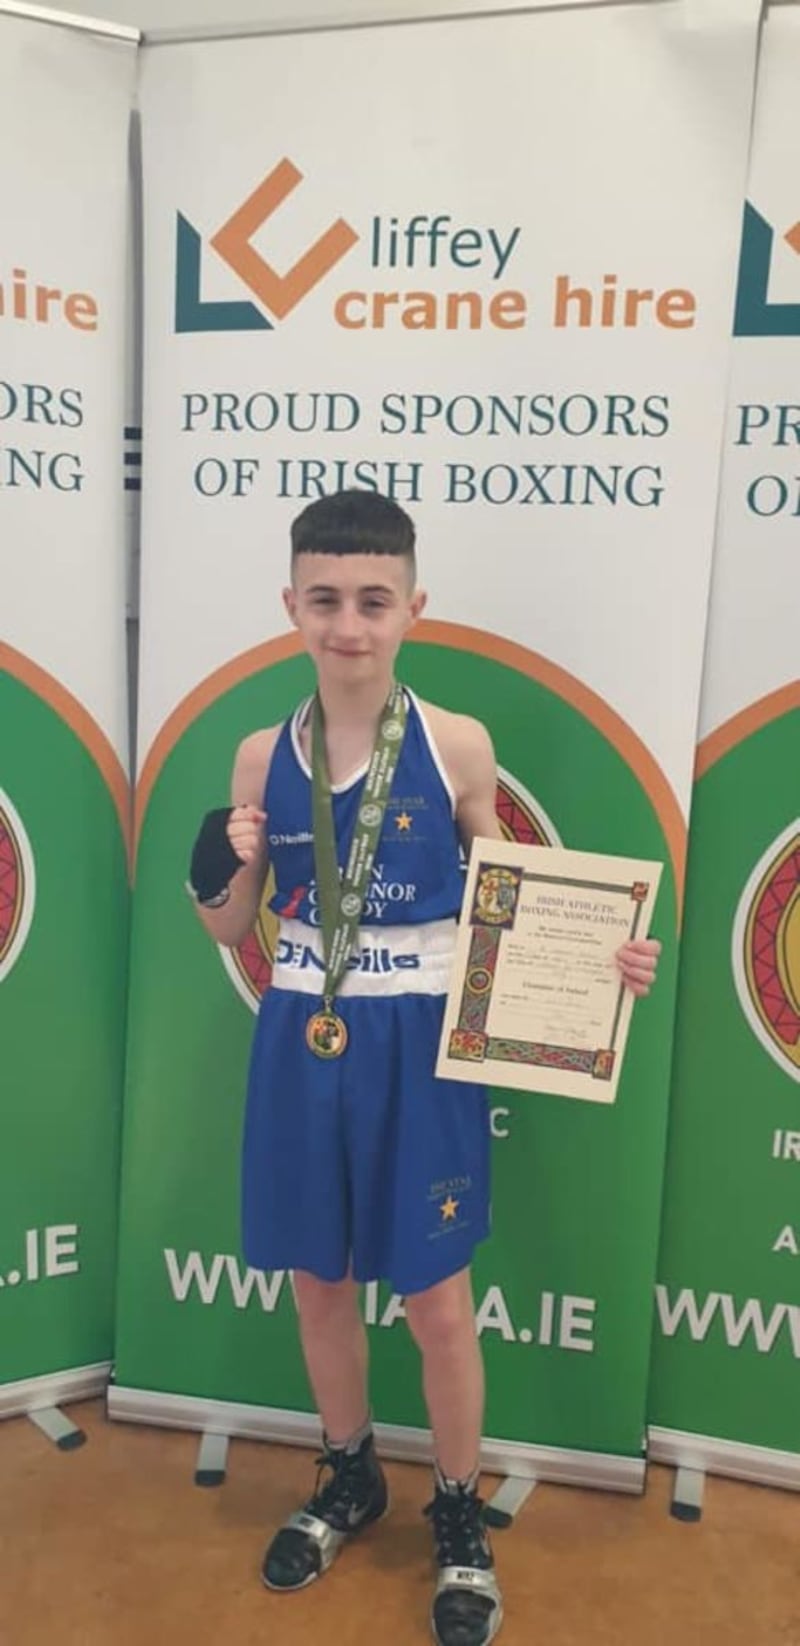 Star's Louis Rooney claimed the Boy 3 33 kilo title at National Stadium on Saturday